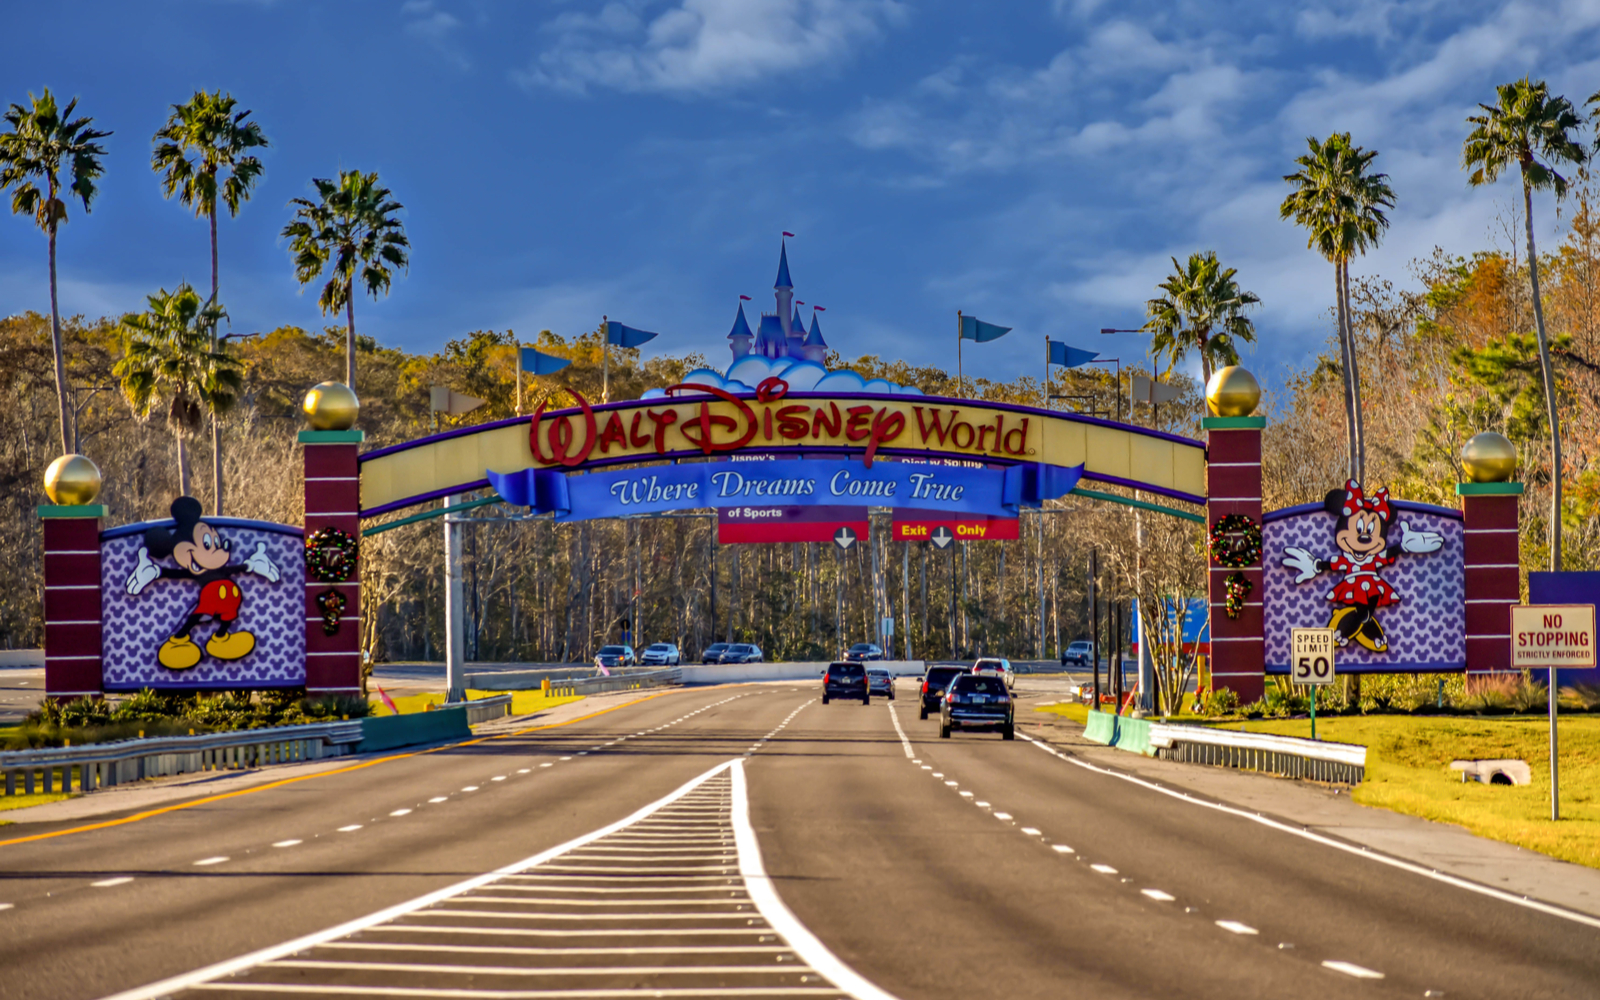 The Best Time to Visit Disney World in 2022